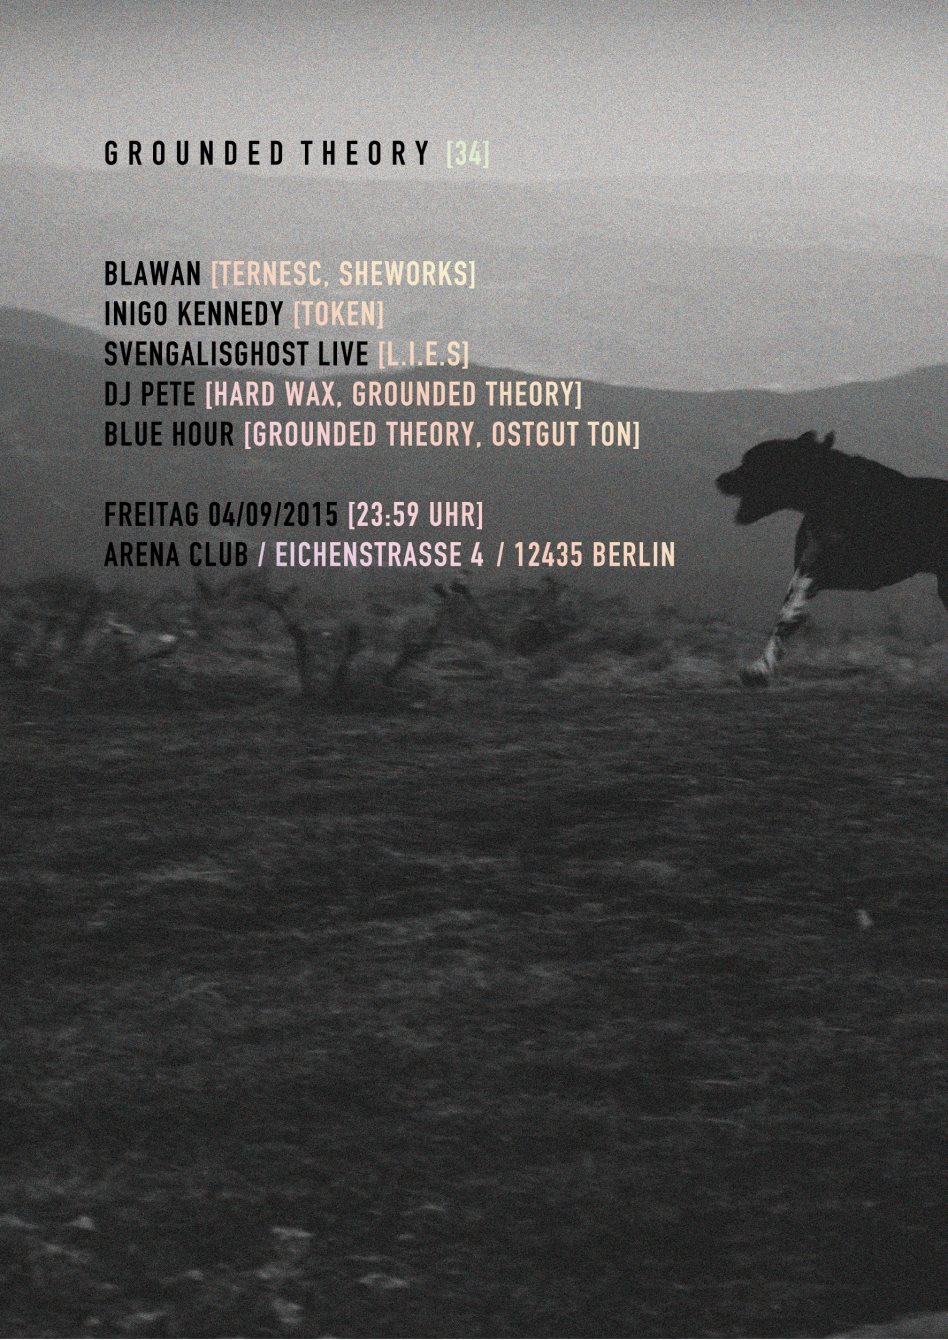 Grounded Theory 34 with Blawan, Inigo Kennedy, Svengalisghost, DJ Pete & Blue Hour - Flyer front